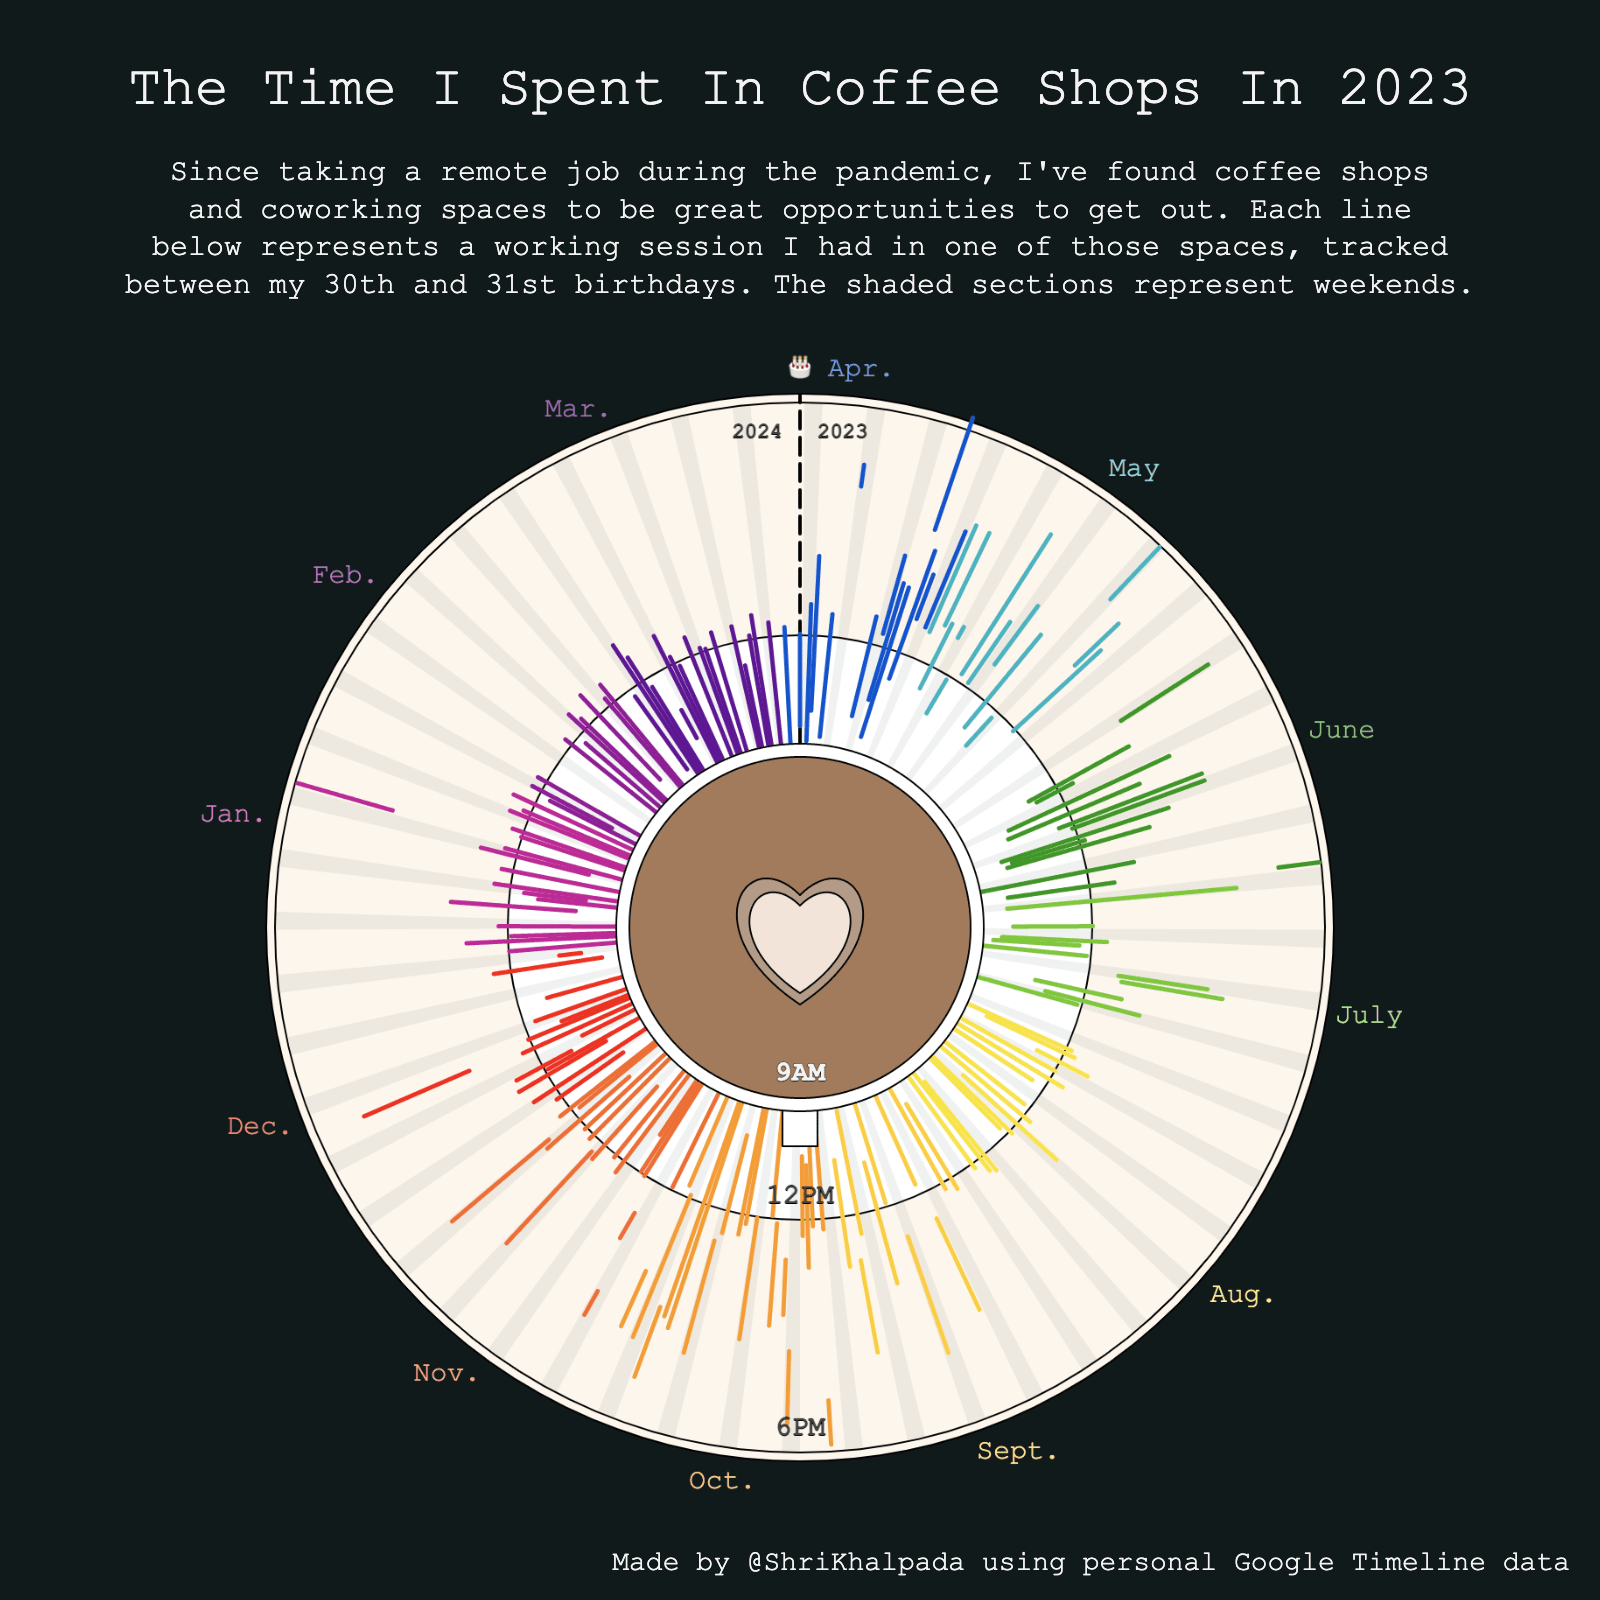 A circular bar graph titled "The Time I Spent In Coffee Shops In 2023," with different colored bars representing hours spent in coffee shops throughout the year and shaded sections indicating weekends.